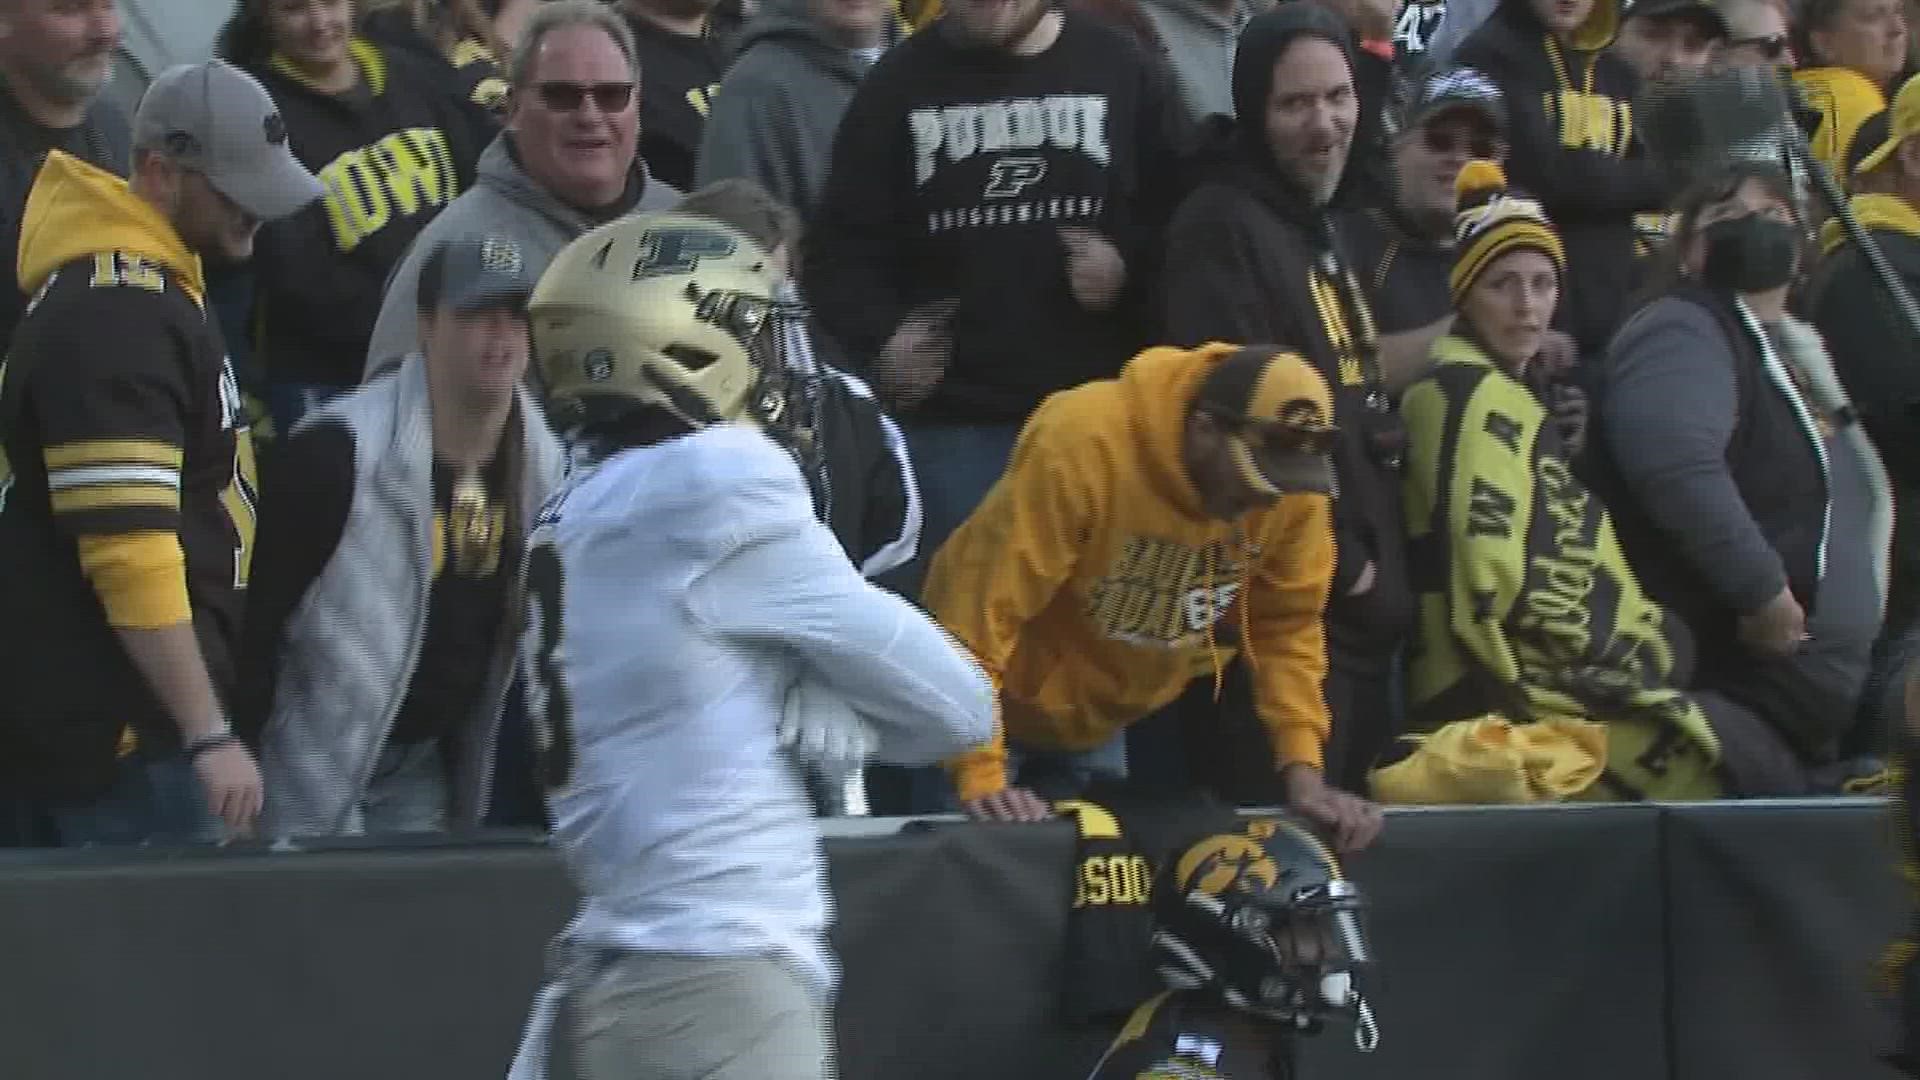 Iowa struggles on offense and Purdue piles up 400 yards to beat Iowa 24-7.